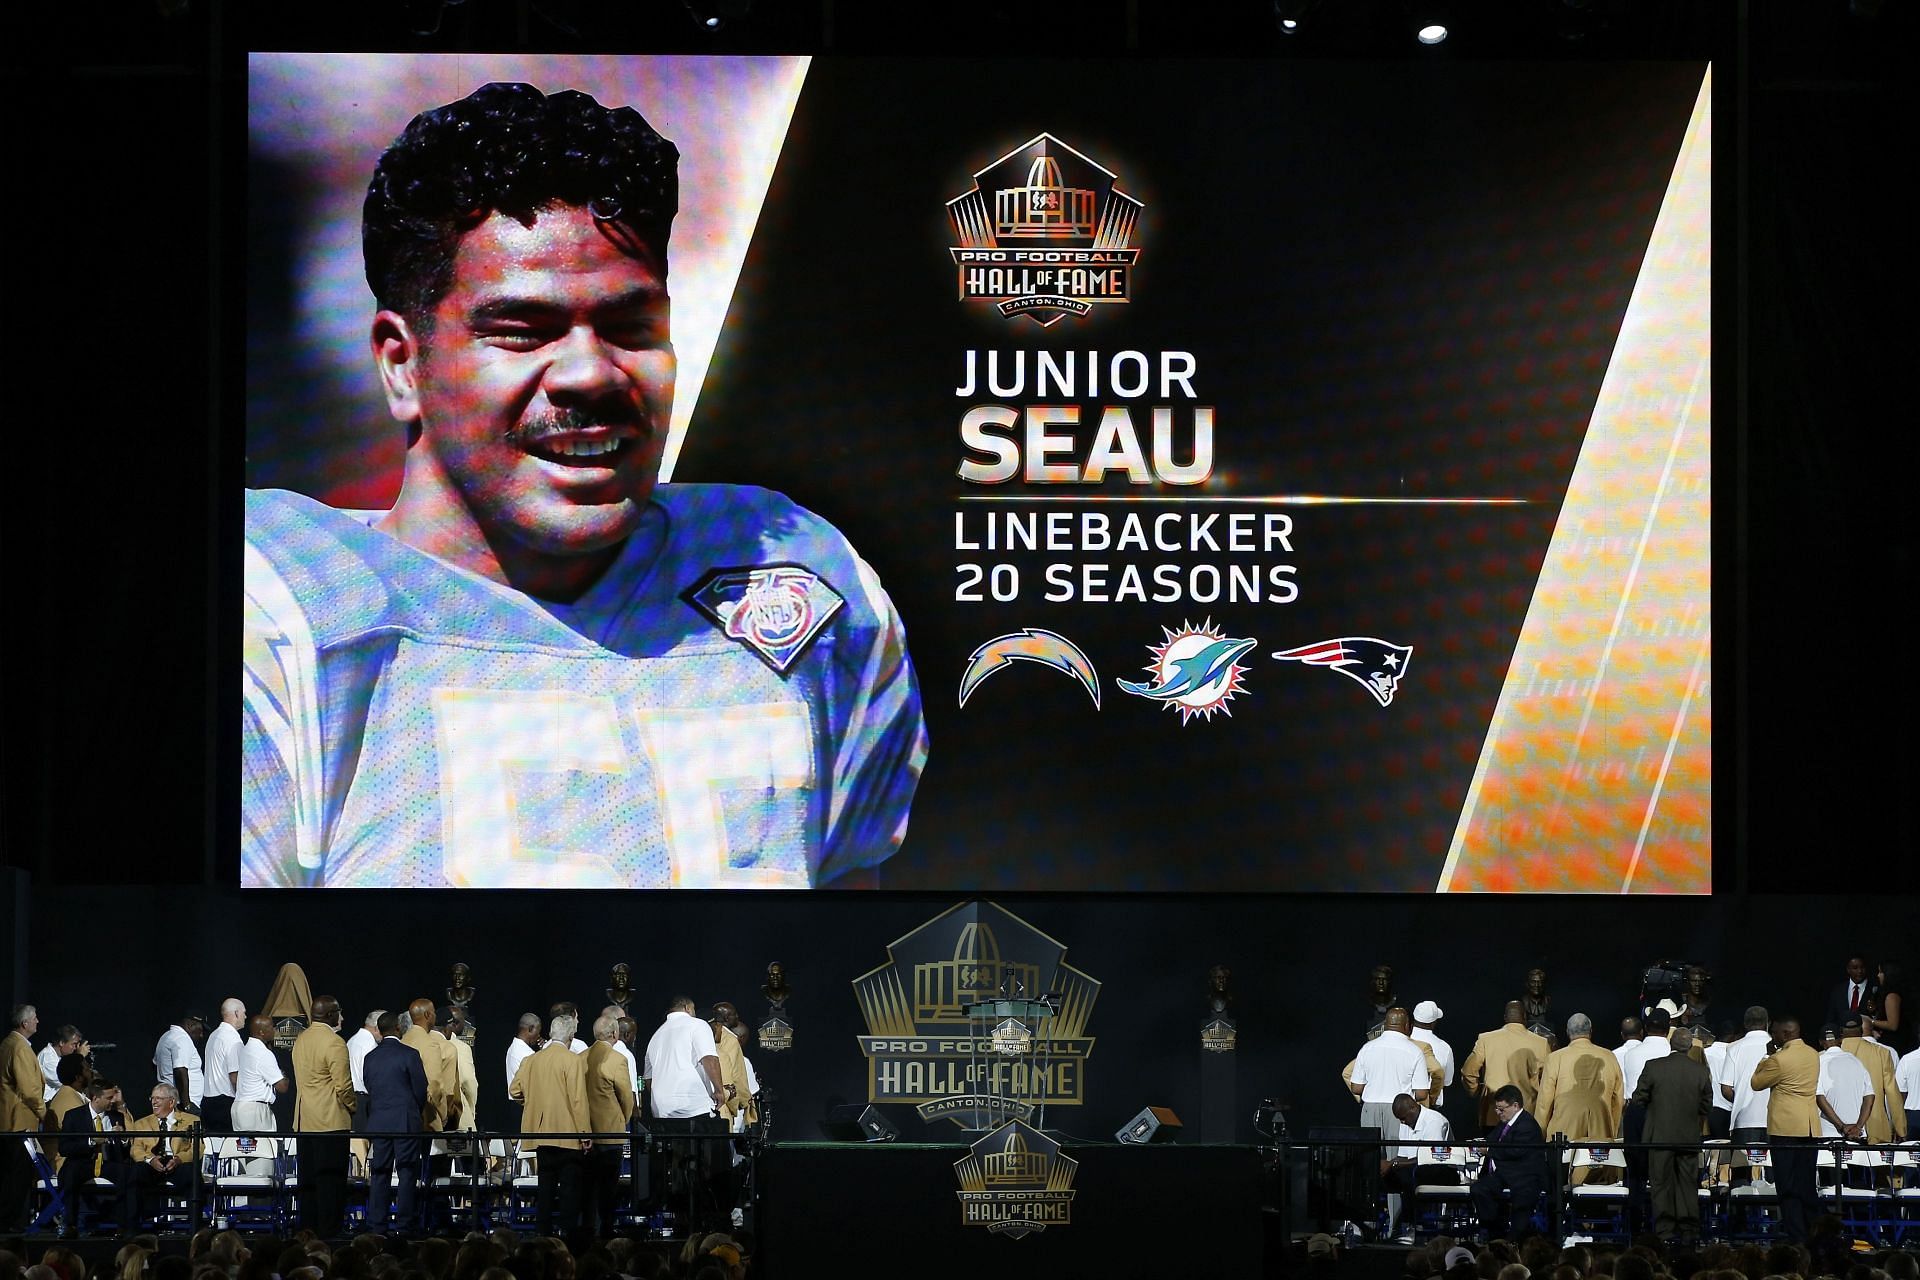 Junior Seau forged a Hall of Fame level career even before teaming up with Tom Brady.